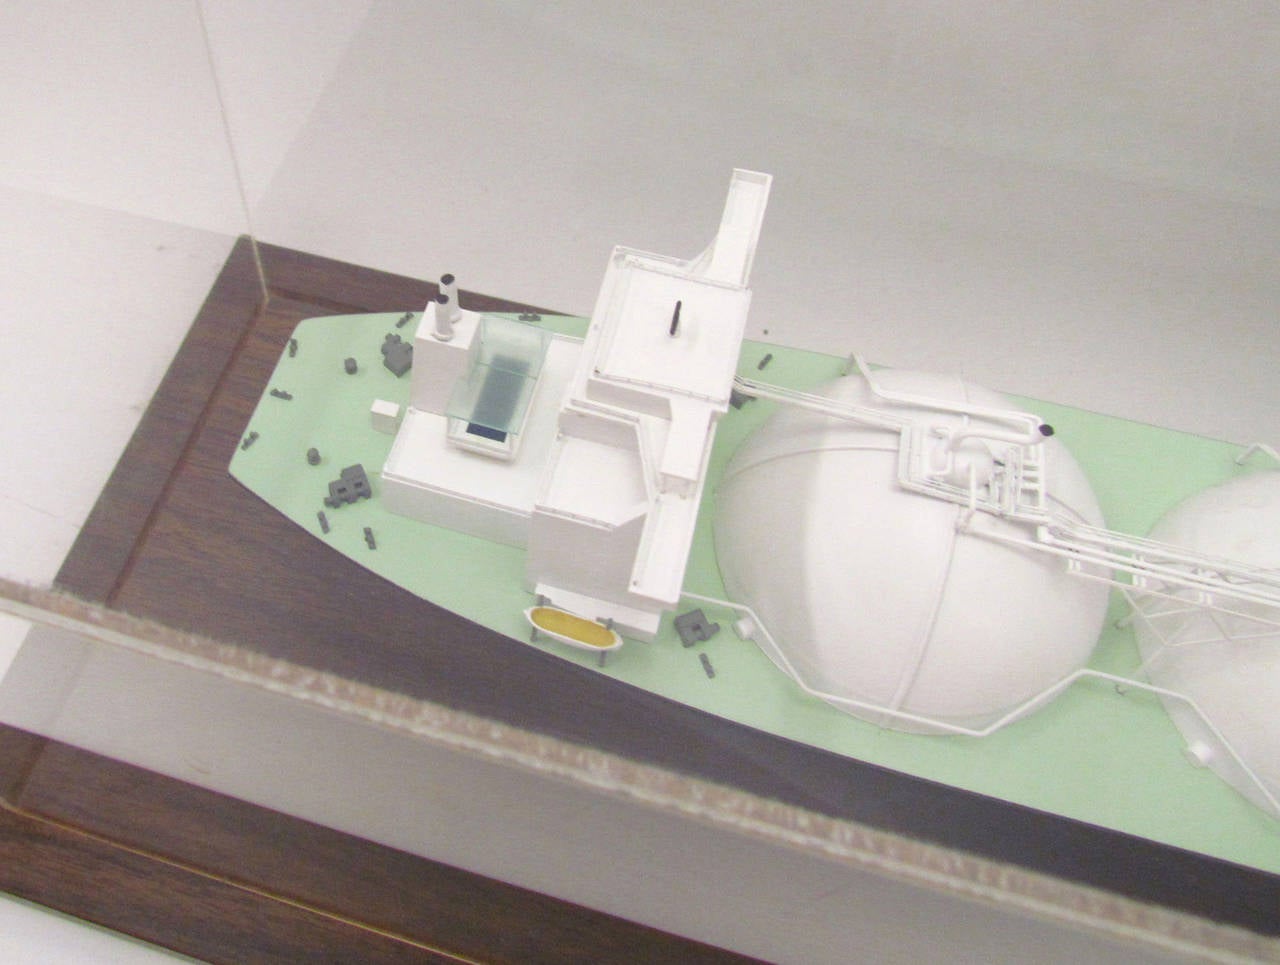 From the estate of a former executive of General Dynamics at the long closed historic Fore River shipyards in Quincy, MA, a presentation model of one of the last line of ships produced there in the 1980s, an LNG (Liquified Natural Gas) tanker. 